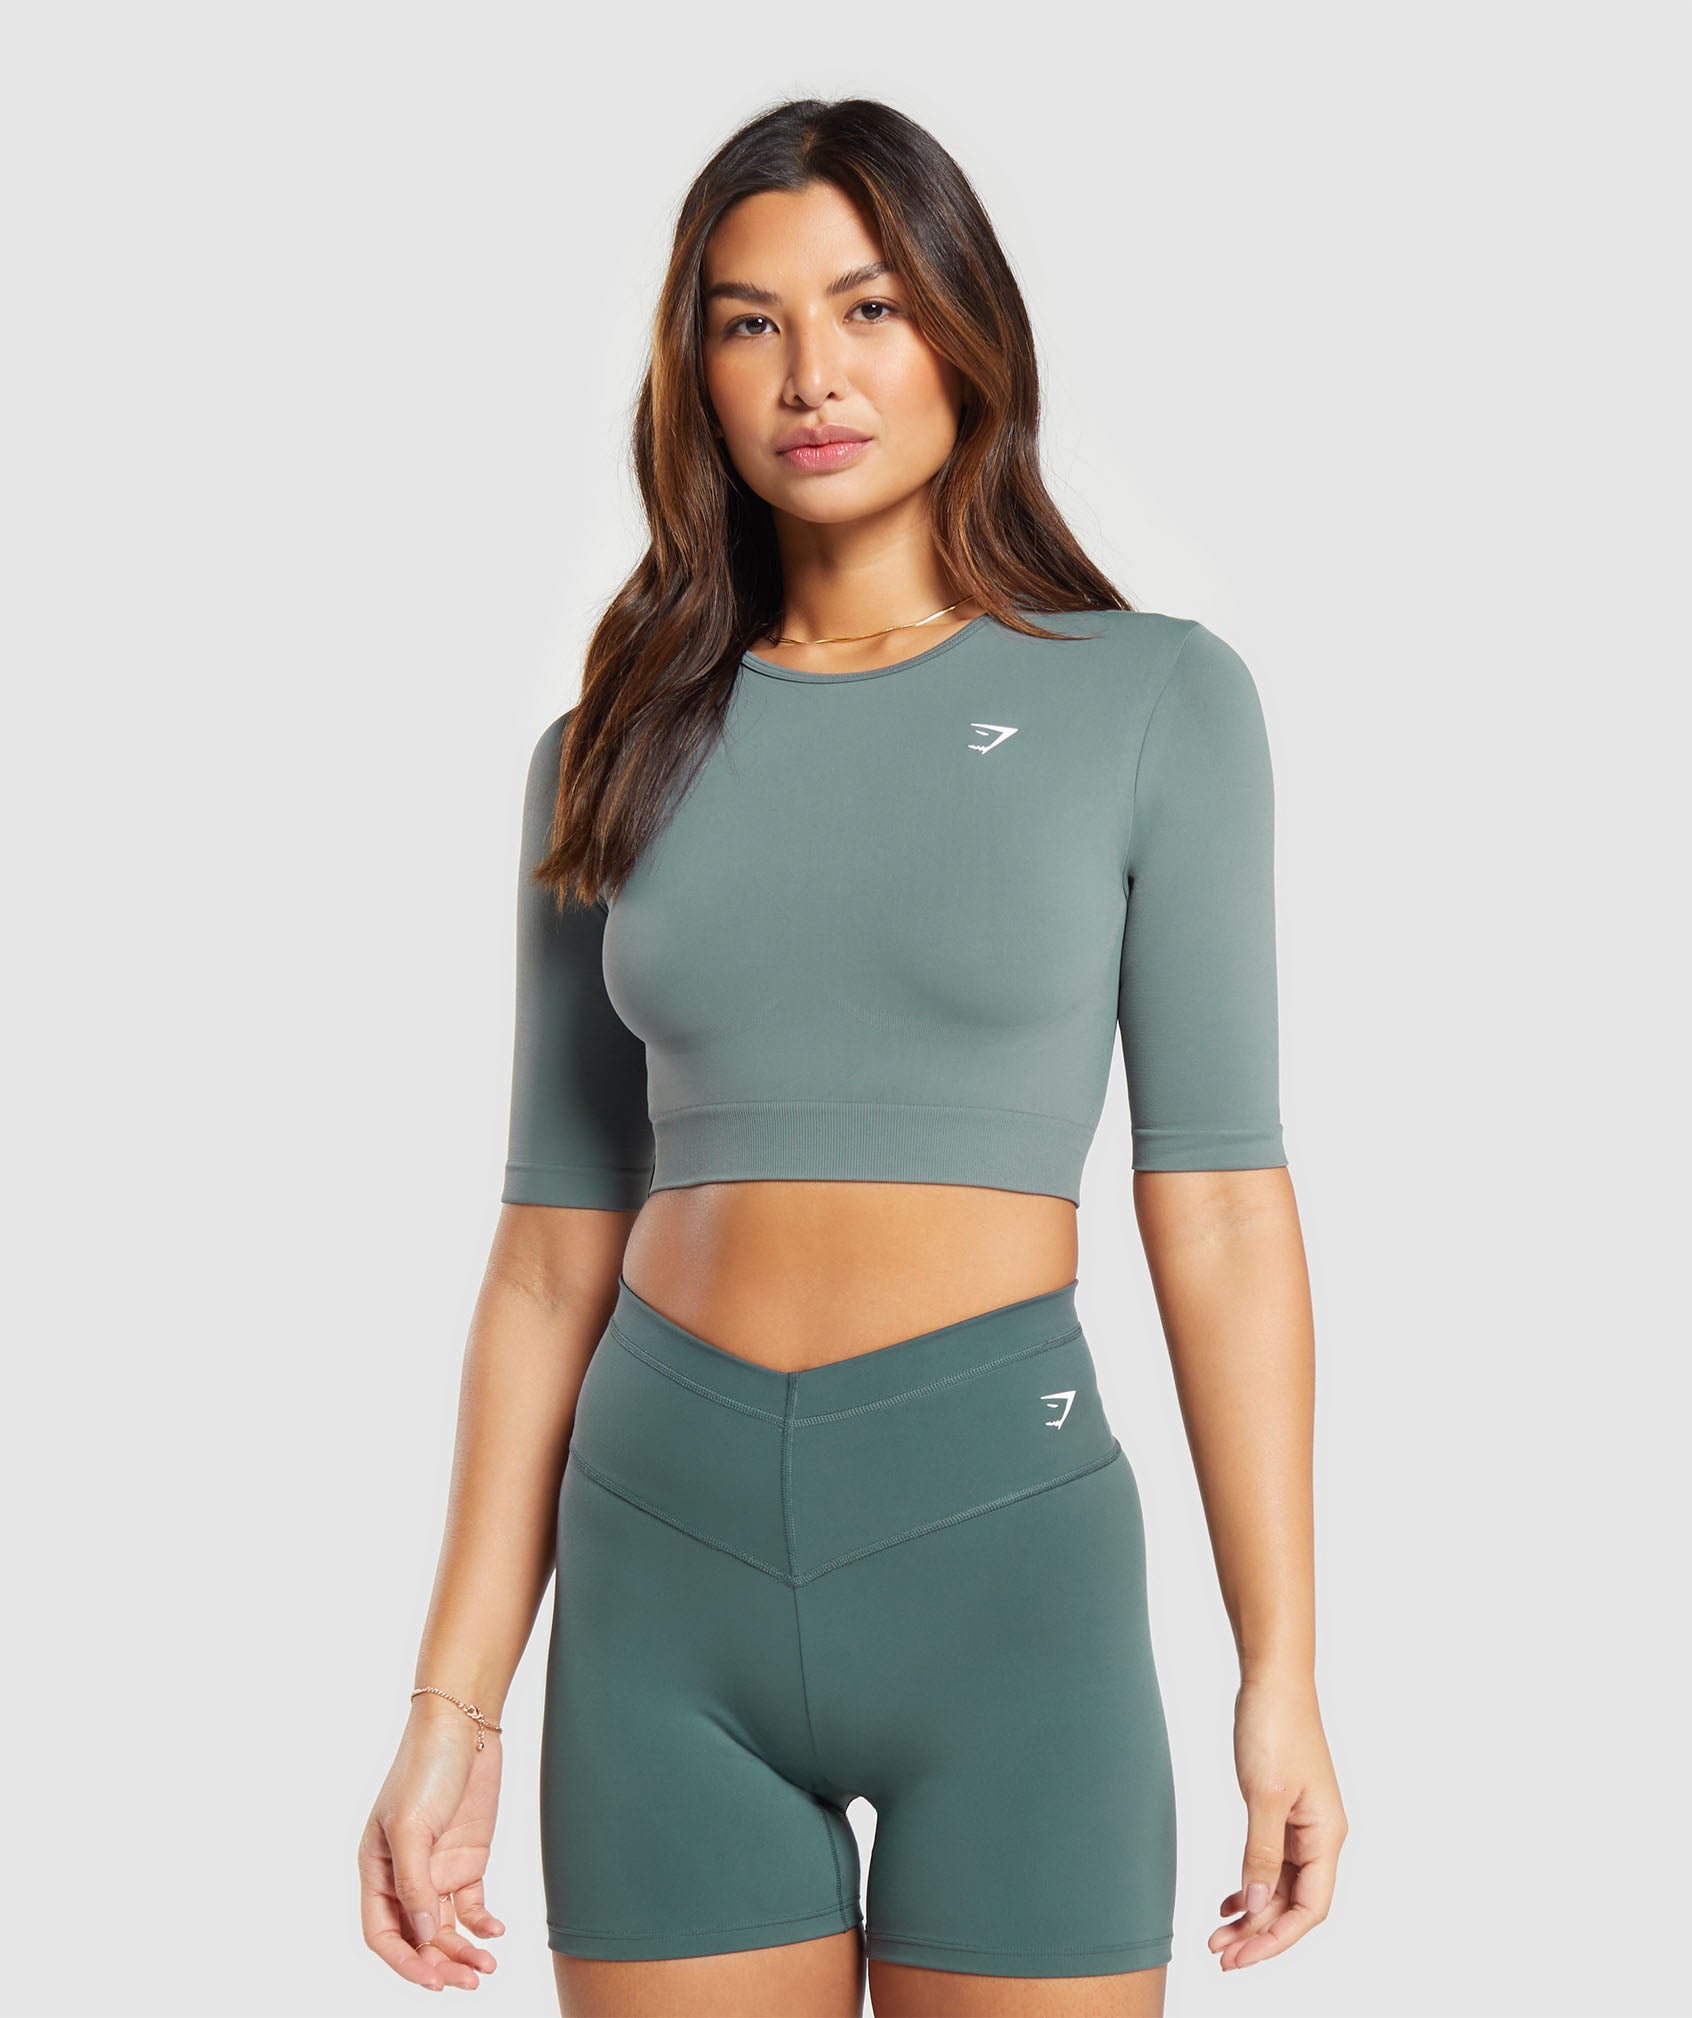 Everyday Seamless Crop Top in Cargo Teal - view 1